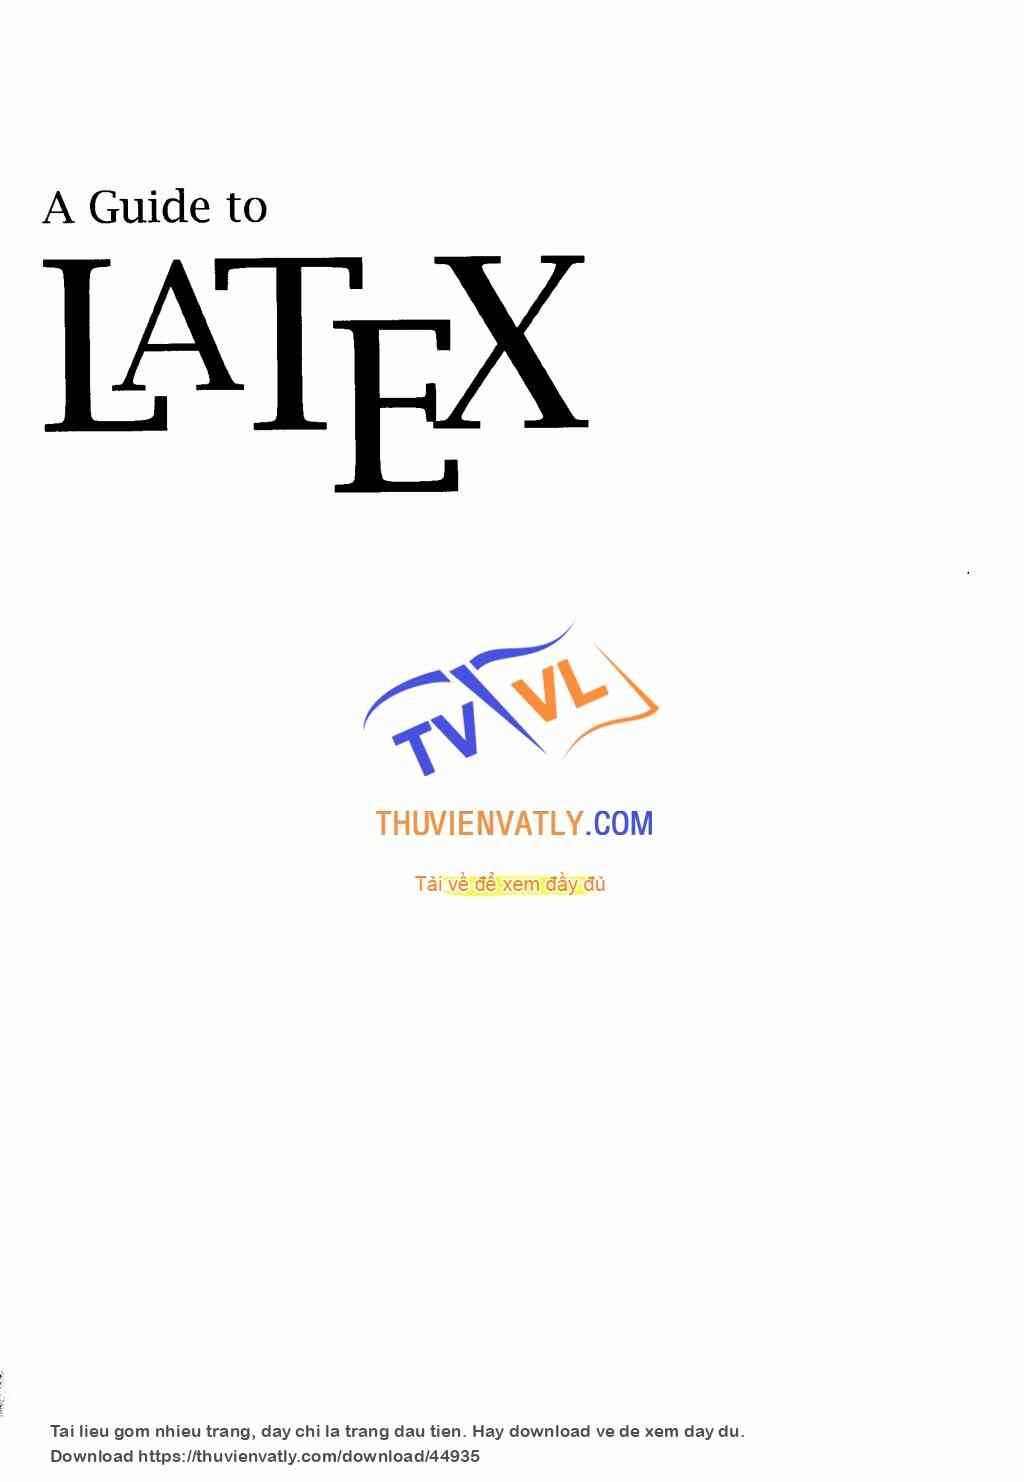 A guide to LaTeX